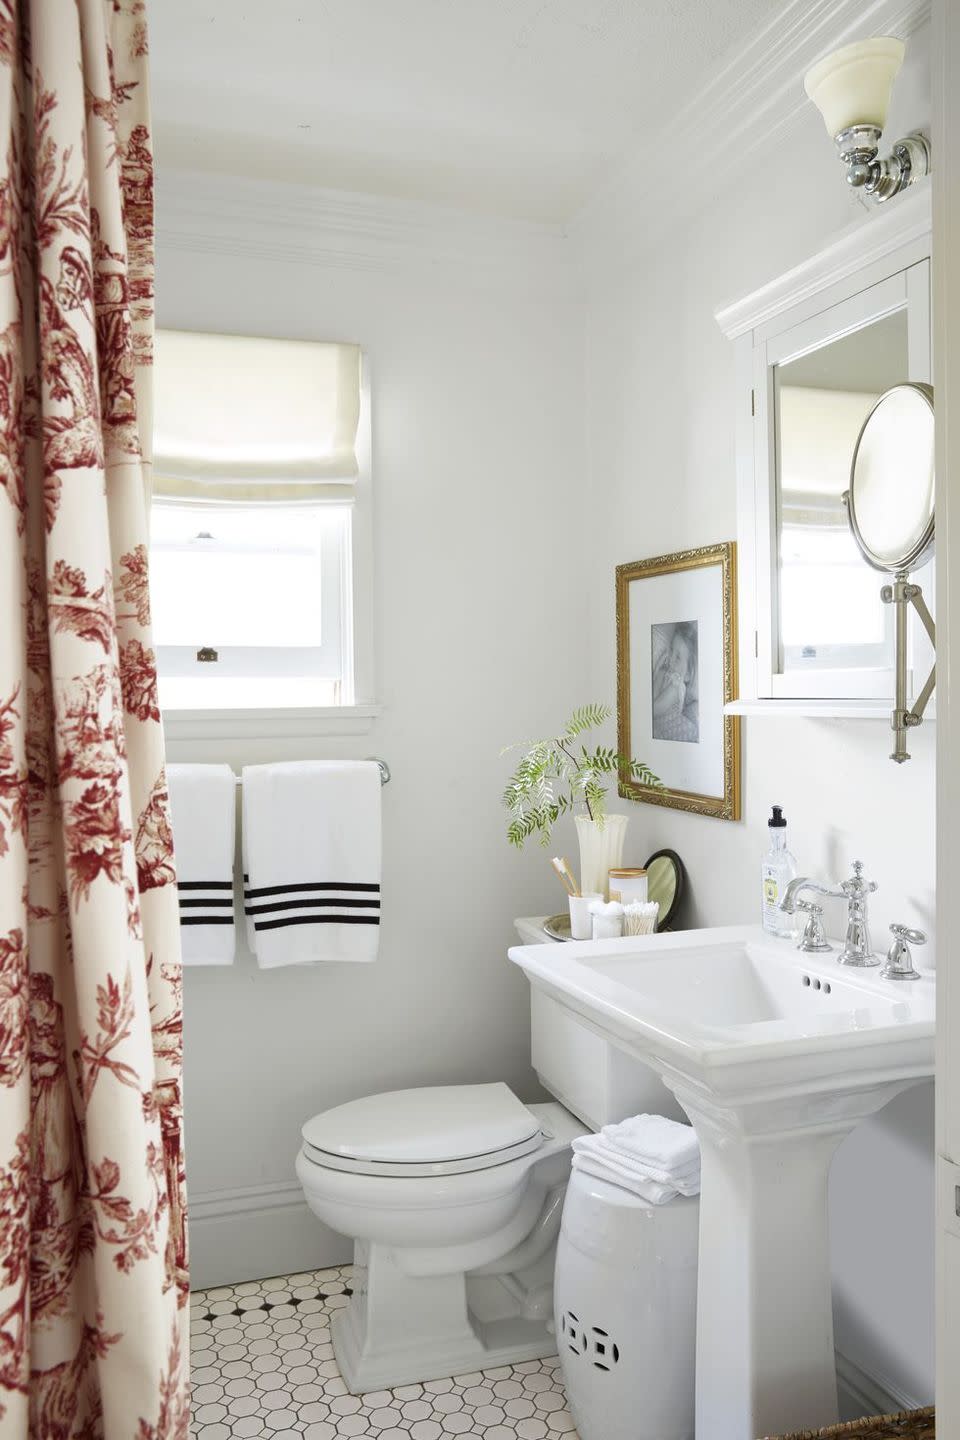 small bathroom storage ideas, garden stool between the white toilet and sink